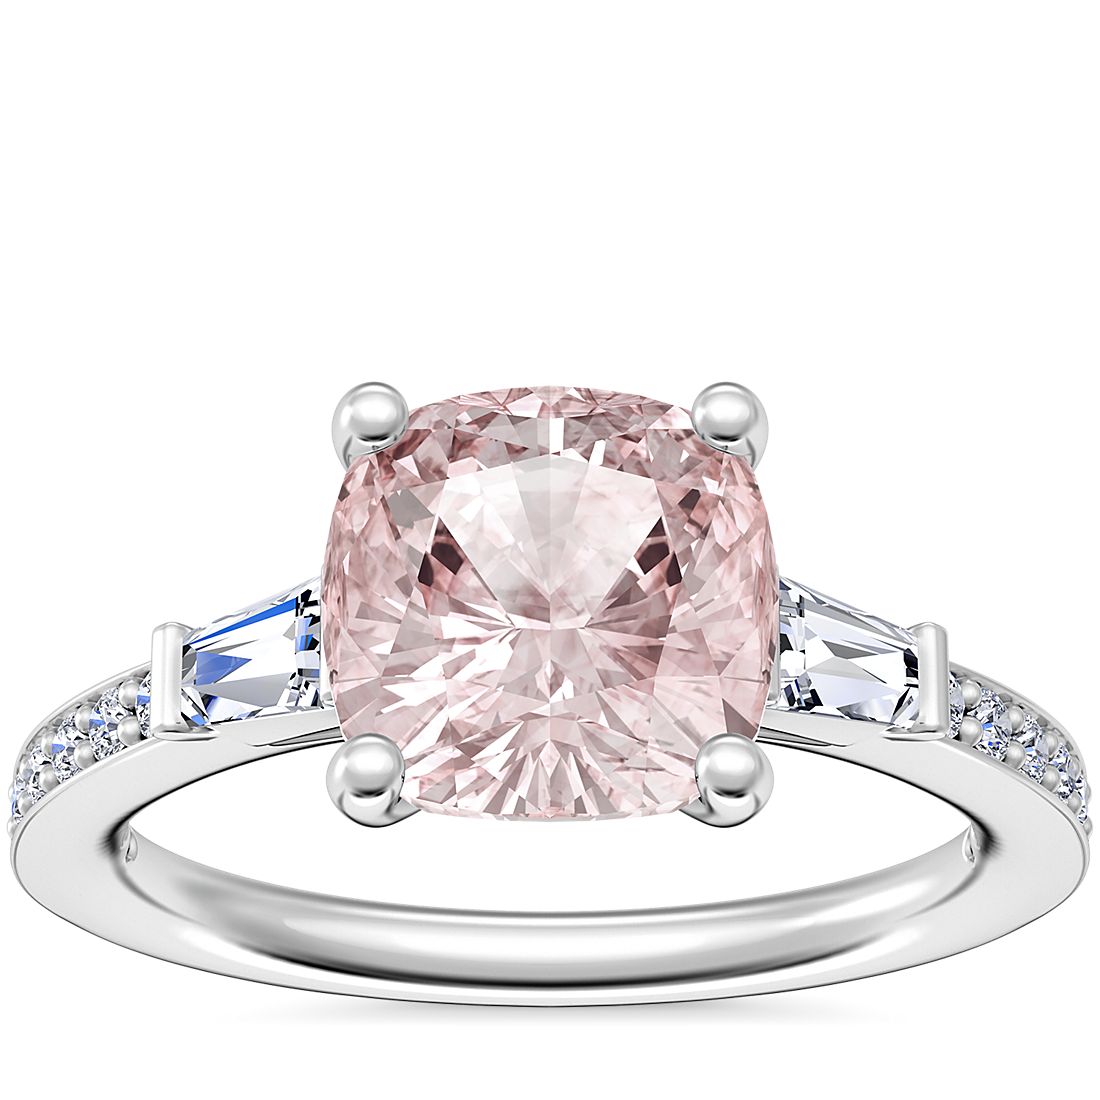 Tapered Baguette Diamond Cathedral Engagement Ring with Cushion Morganite in 14k White Gold (8mm)